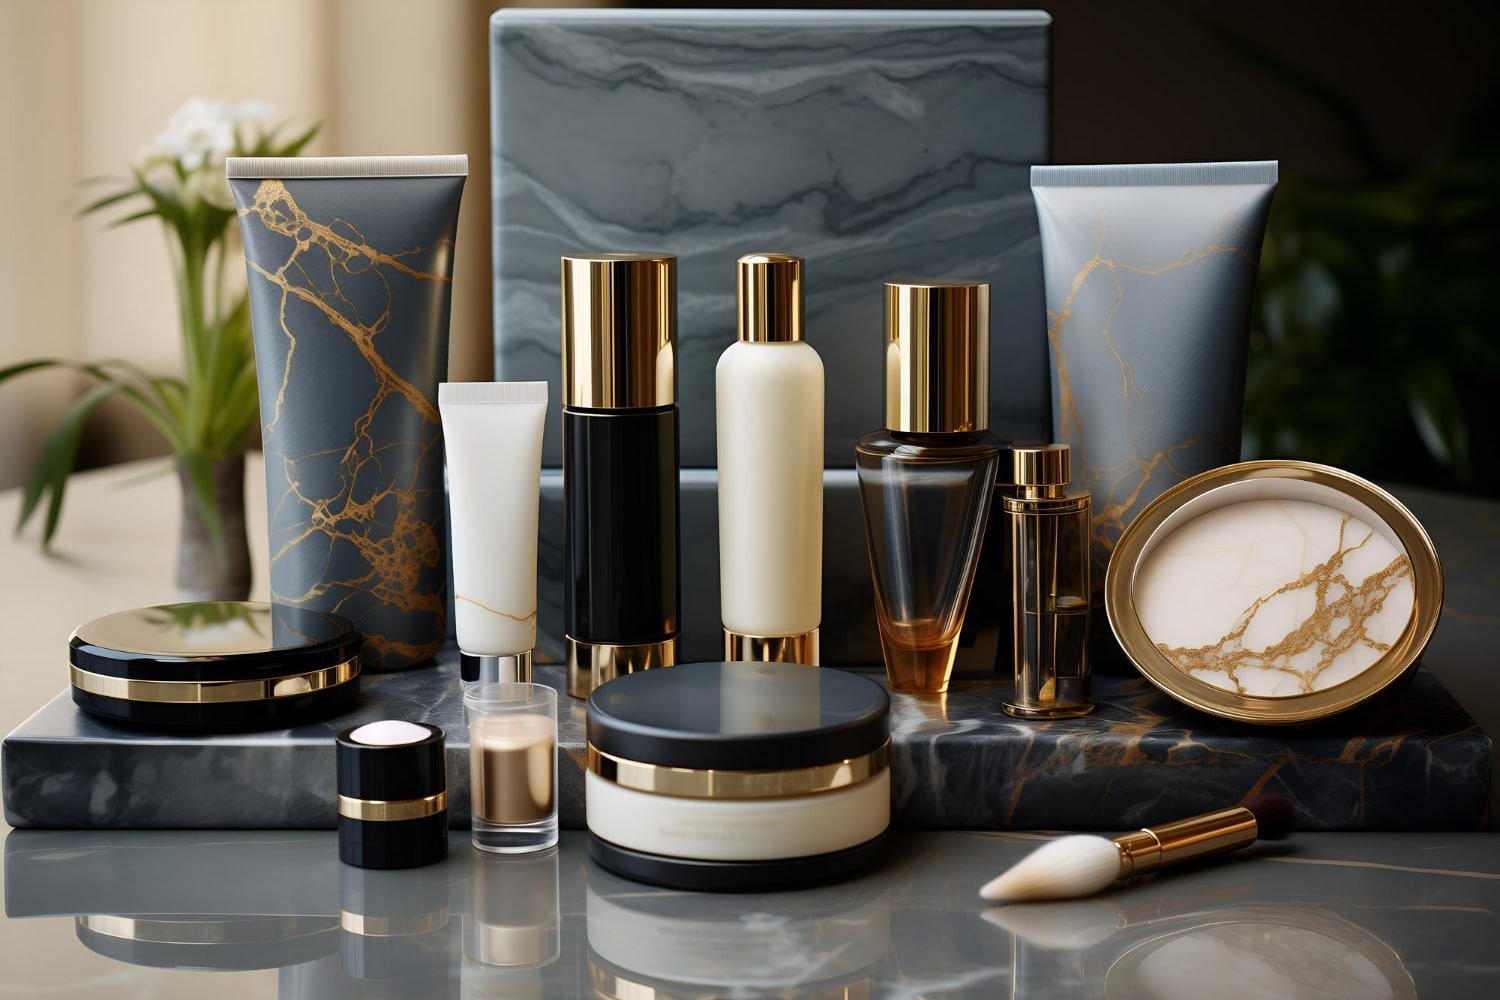 Indulge In Luxurious Skincare With Tower 28 Beauty’s Clean Beauty Products